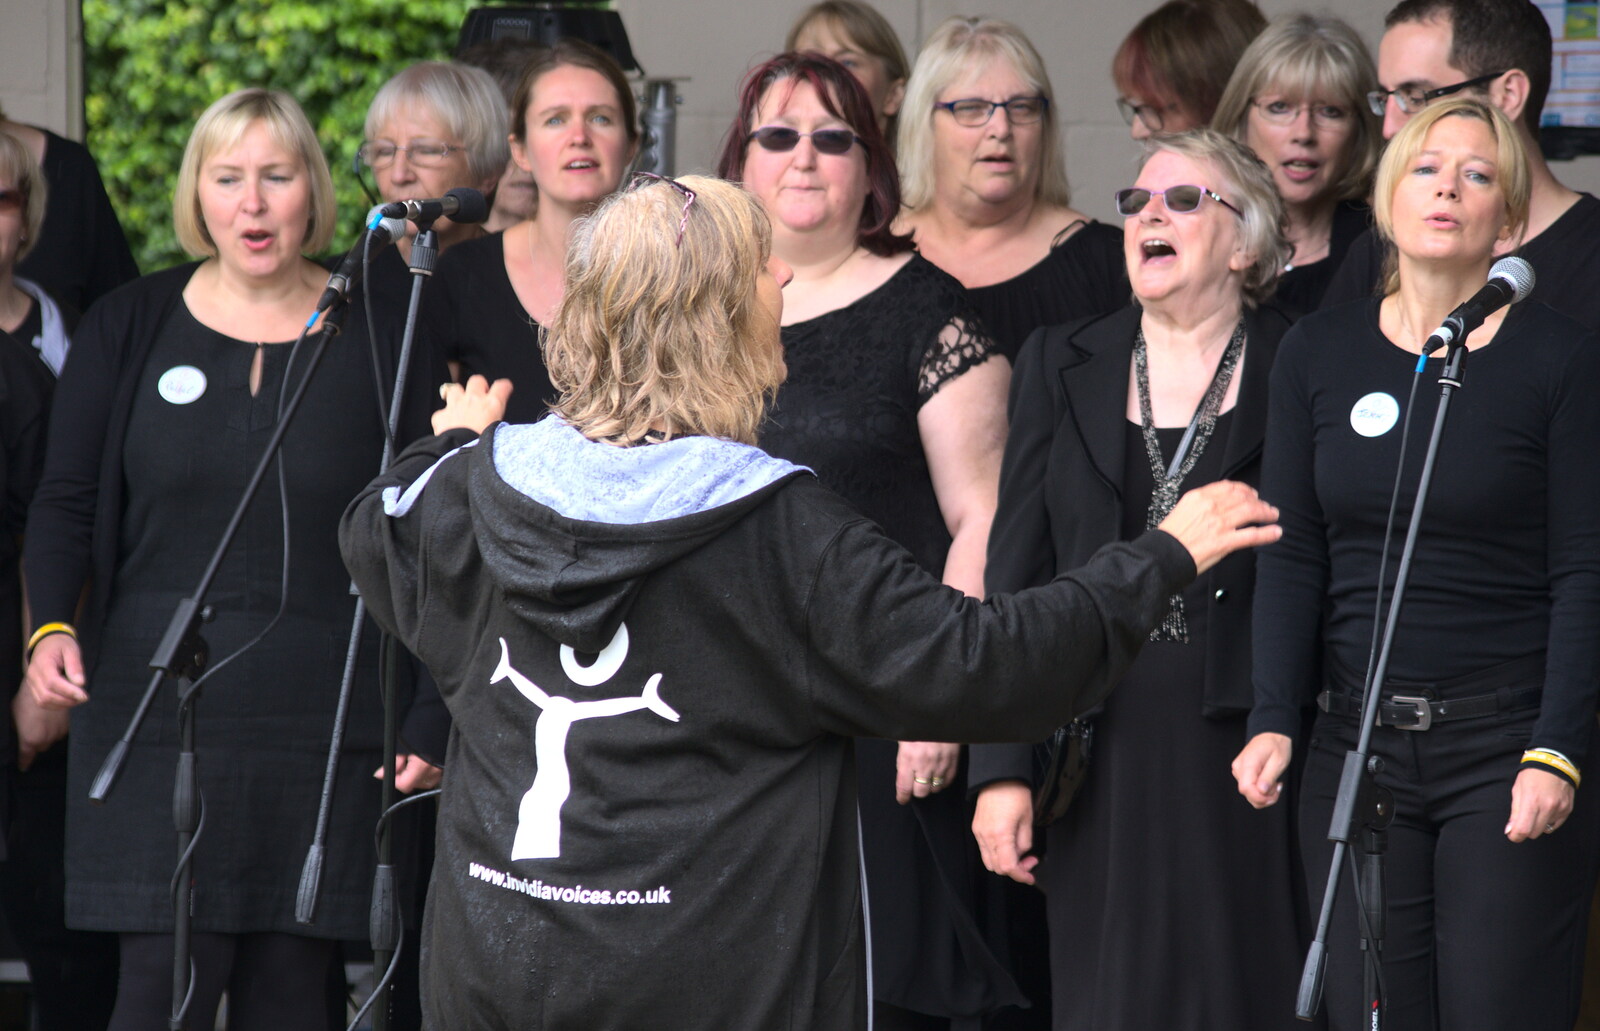 the conductor, er, conducts from Diss Fest, or Singin' in the Rain, Diss, Norfolk - 23rd July 2017